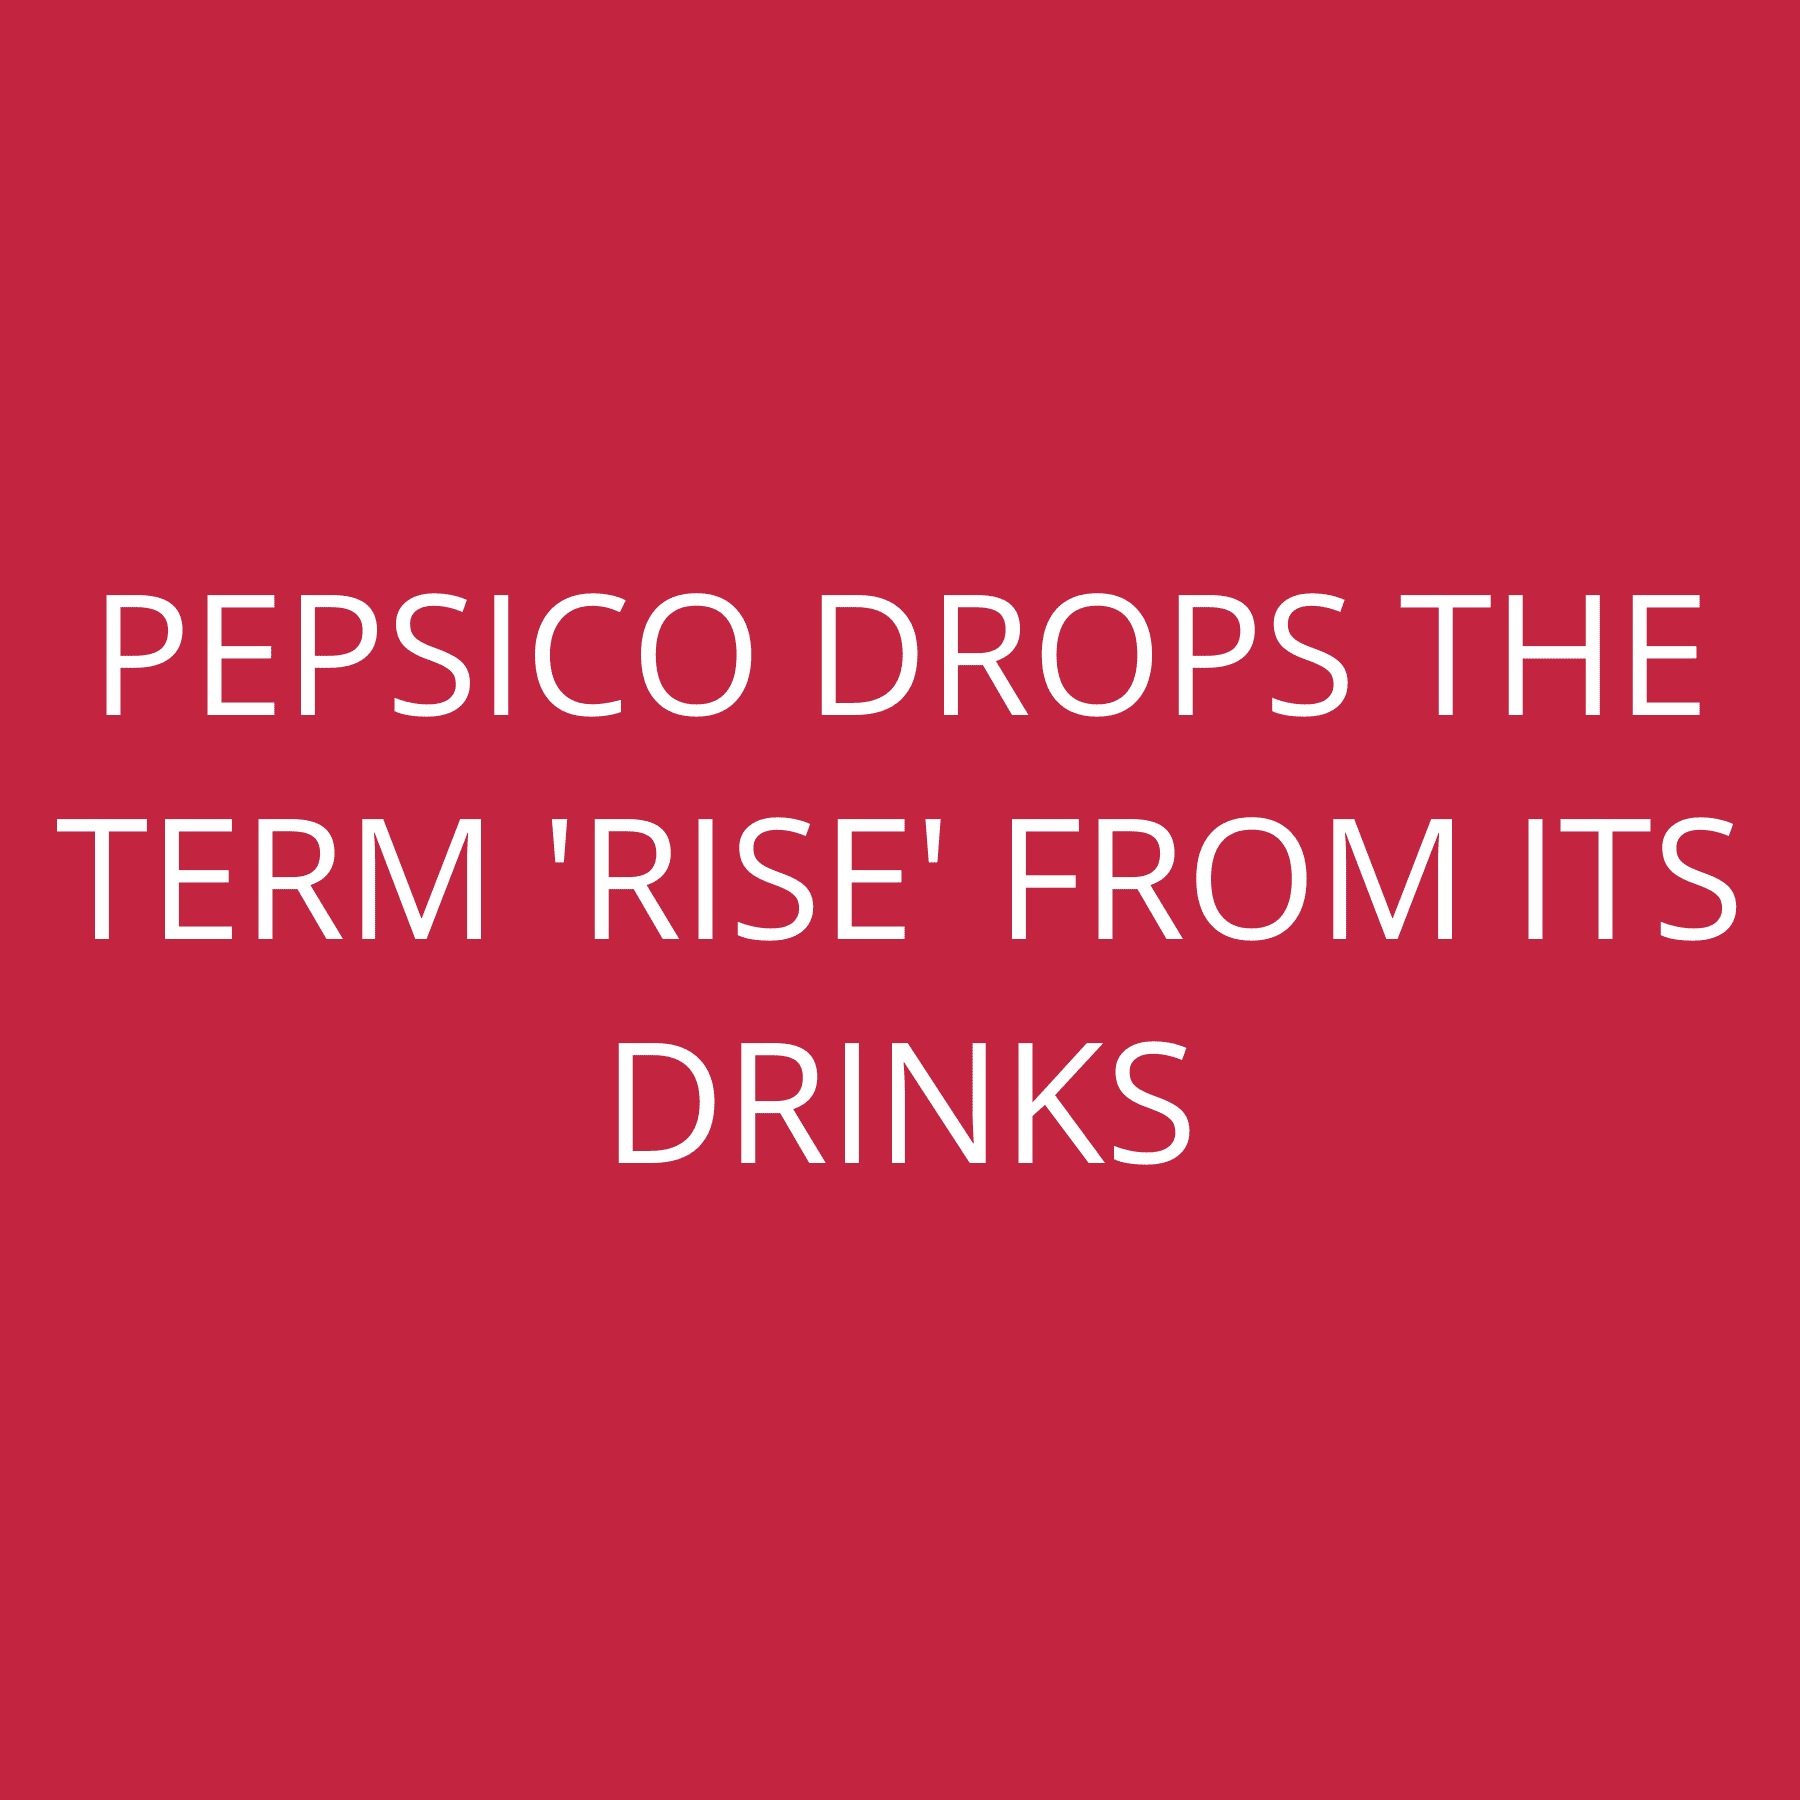 PepsiCo drops the term ‘Rise’ from its drinks